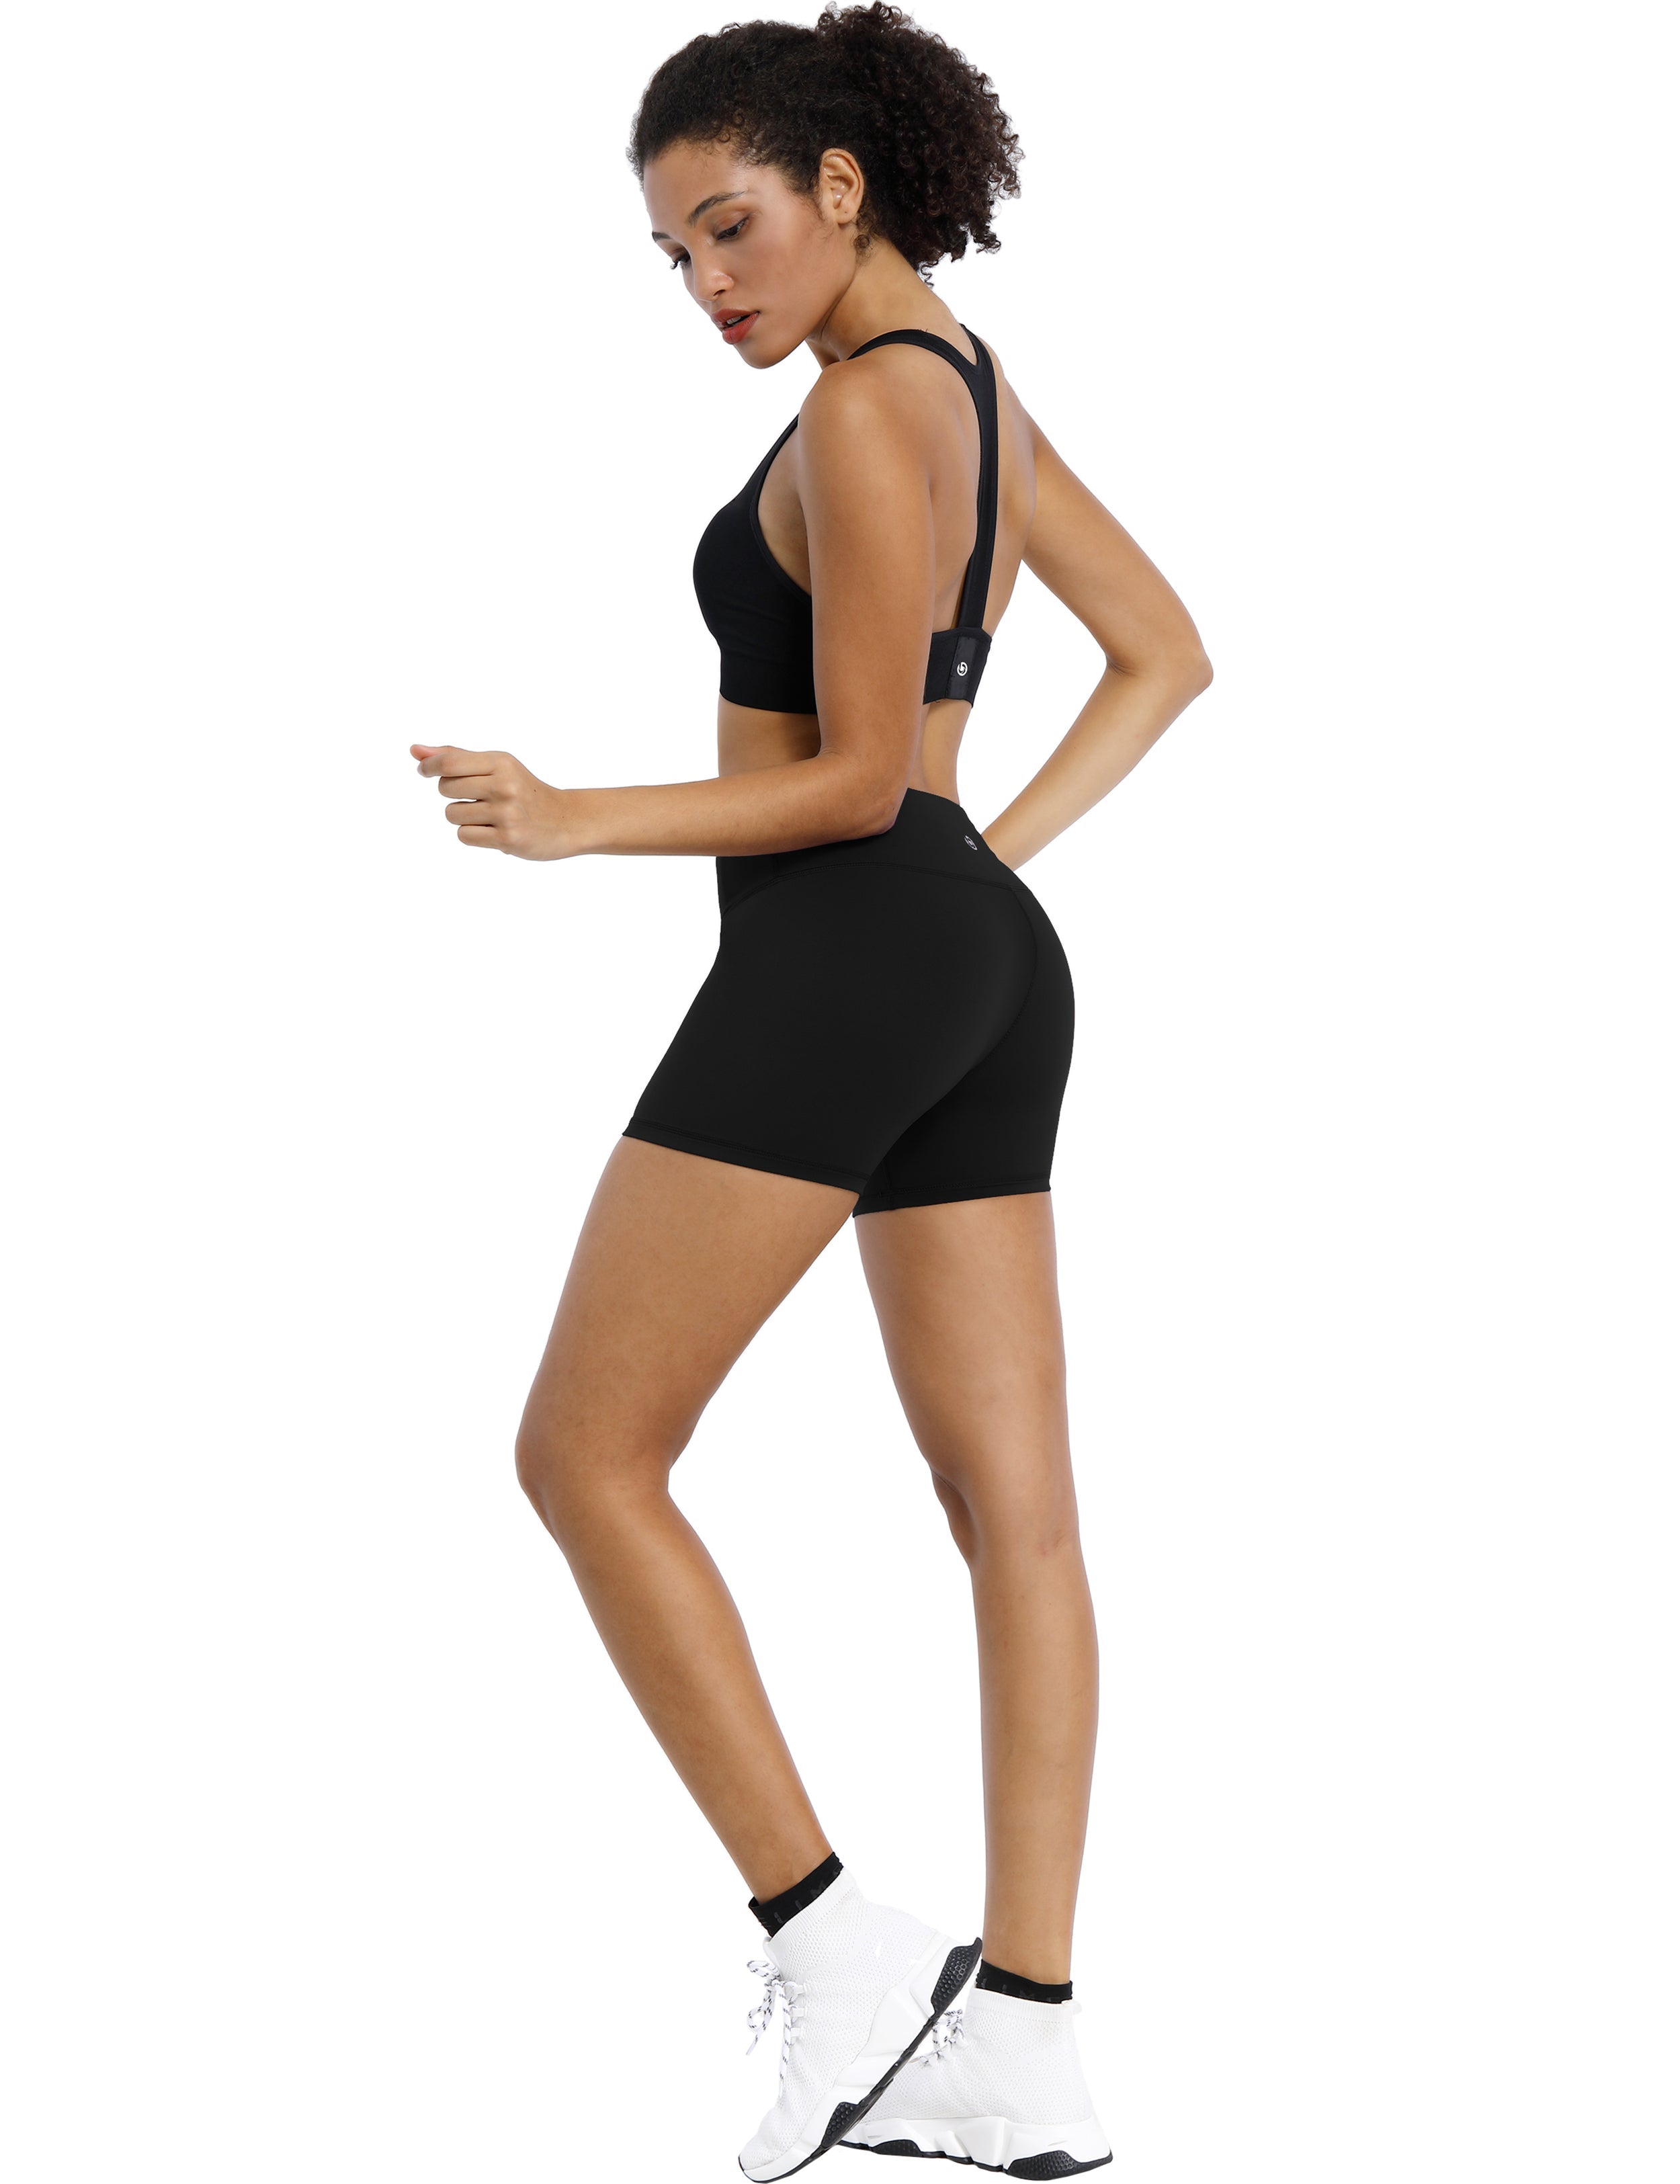 4" Biking Shorts black Sleek, soft, smooth and totally comfortable: our newest style is here. Softest-ever fabric High elasticity High density 4-way stretch Fabric doesn't attract lint easily No see-through Moisture-wicking Machine wash 75% Nylon, 25% Spandex